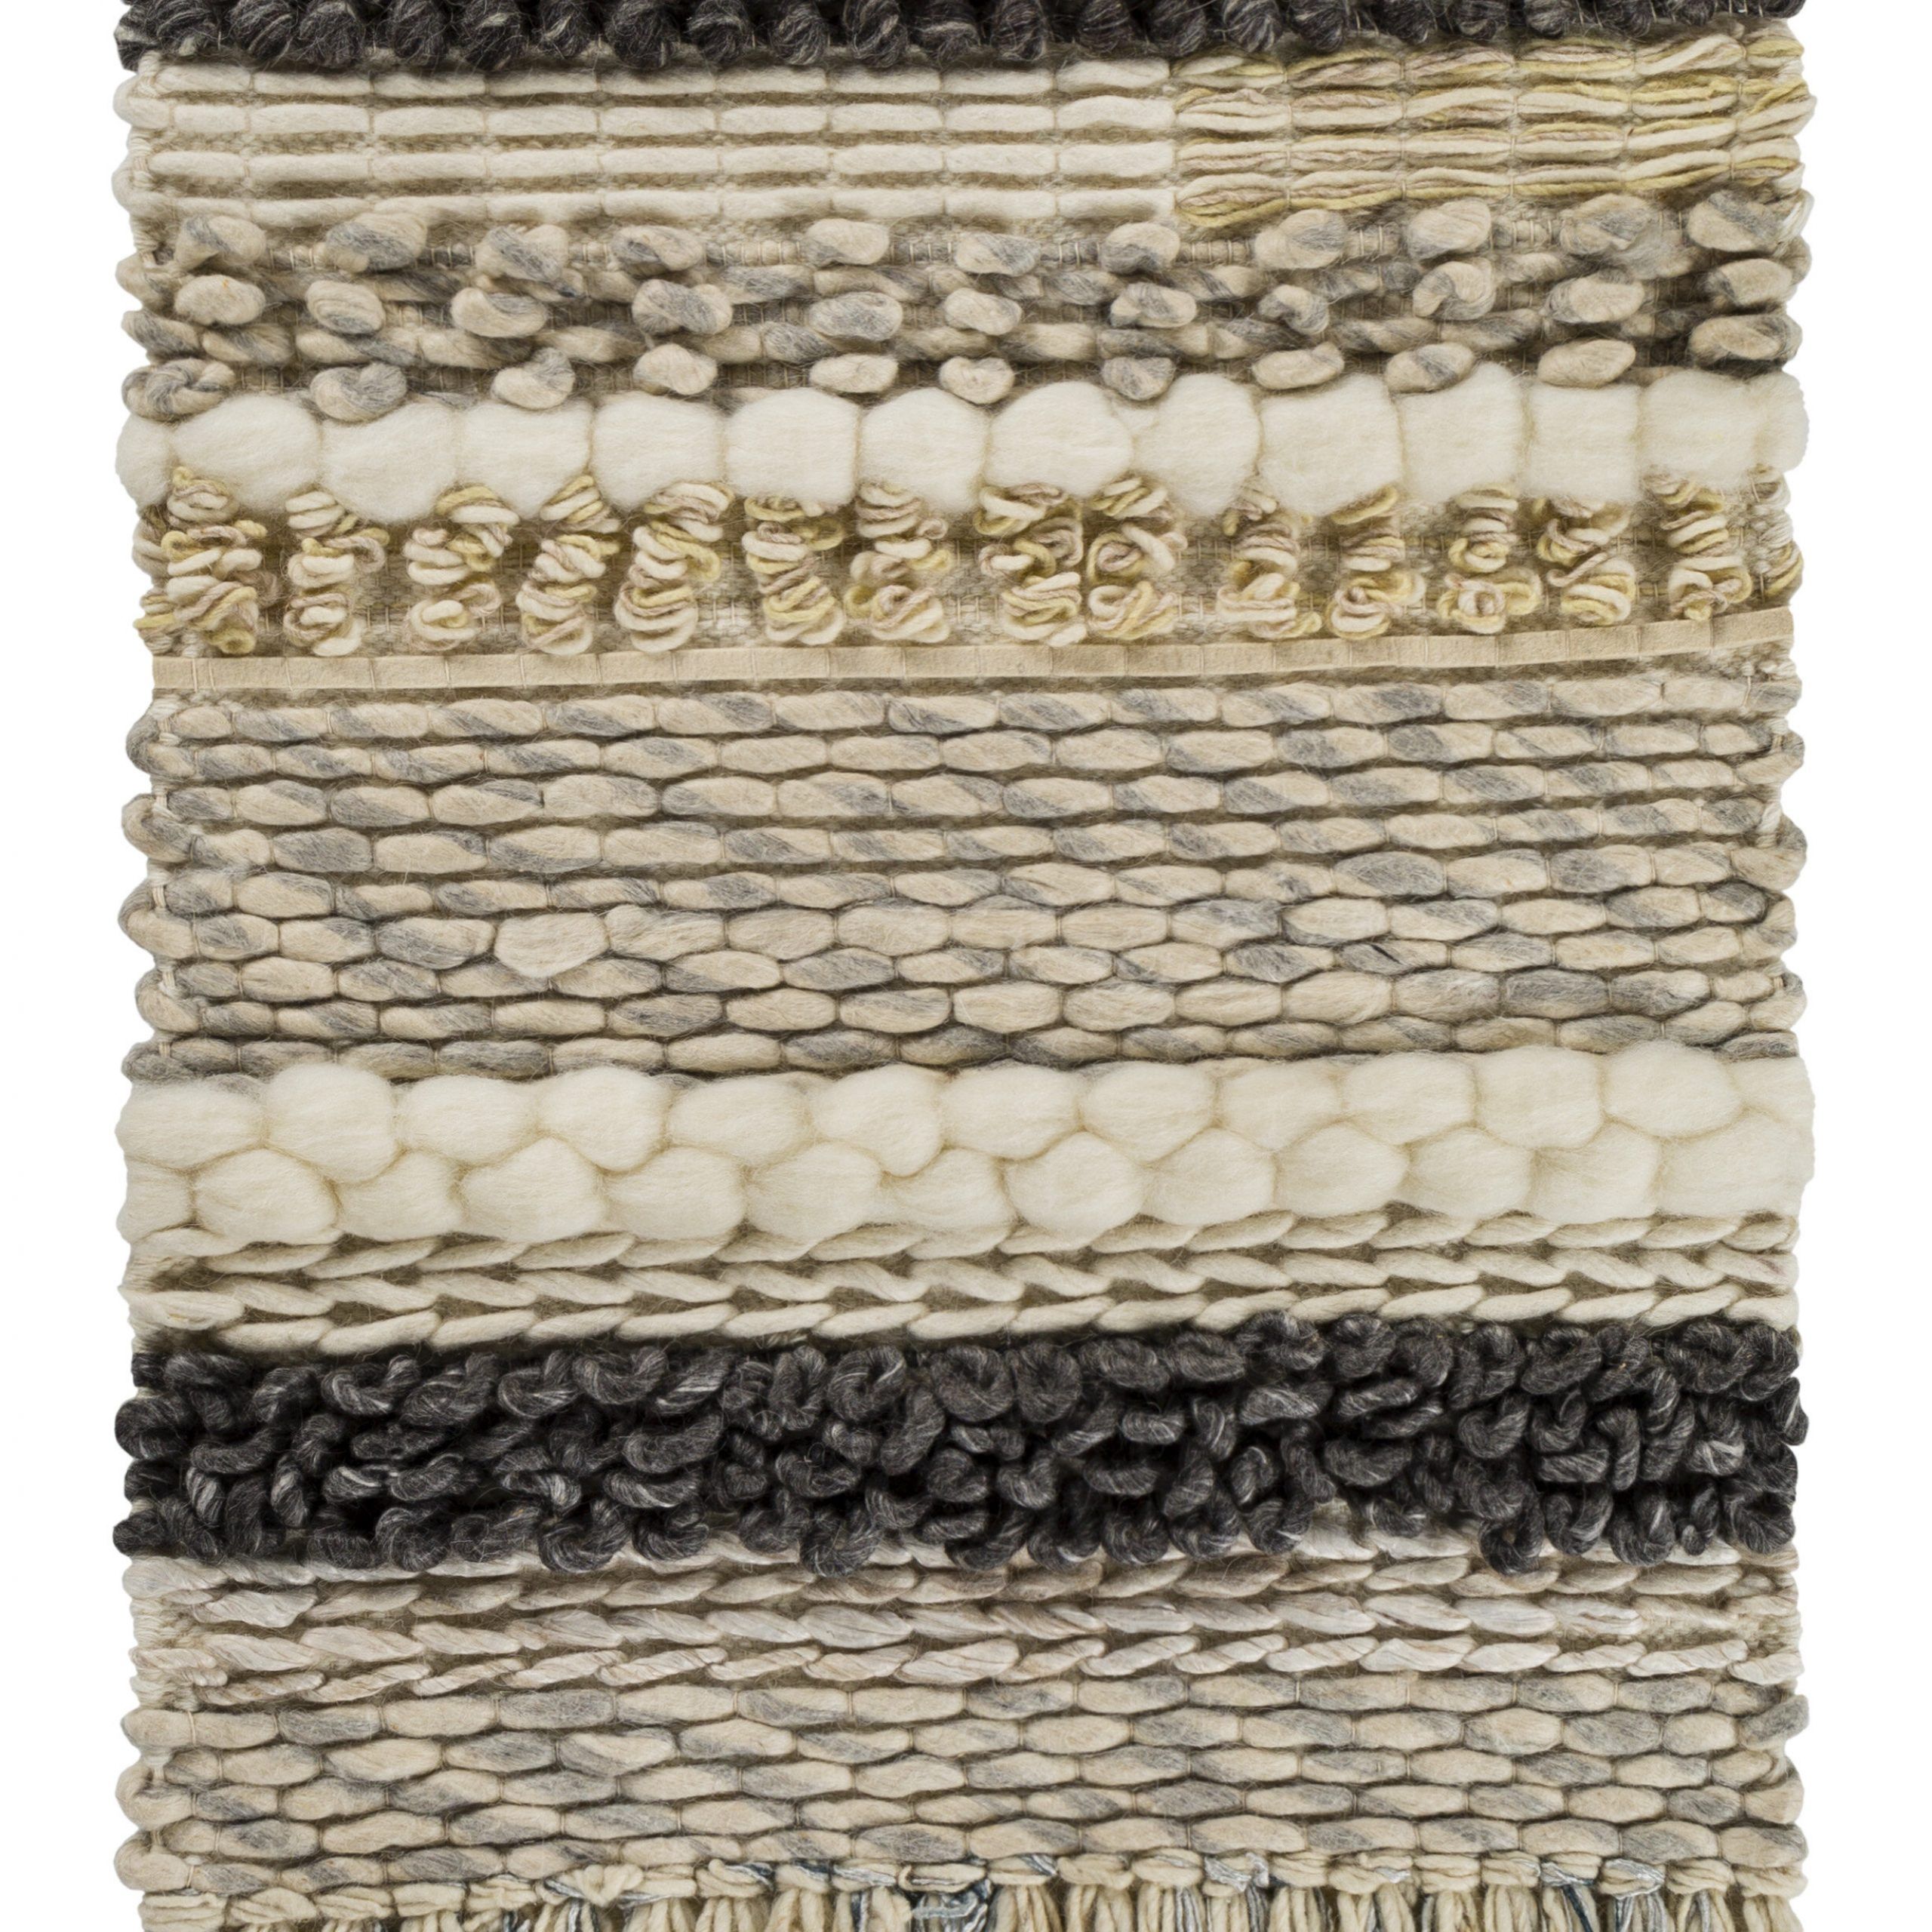 Teresina Wool And Viscose Wall Hanging With Hanging Accessories Included Throughout 2017 Blended Fabric Ranier Wall Hangings With Hanging Accessories Included (Gallery 4 of 20)